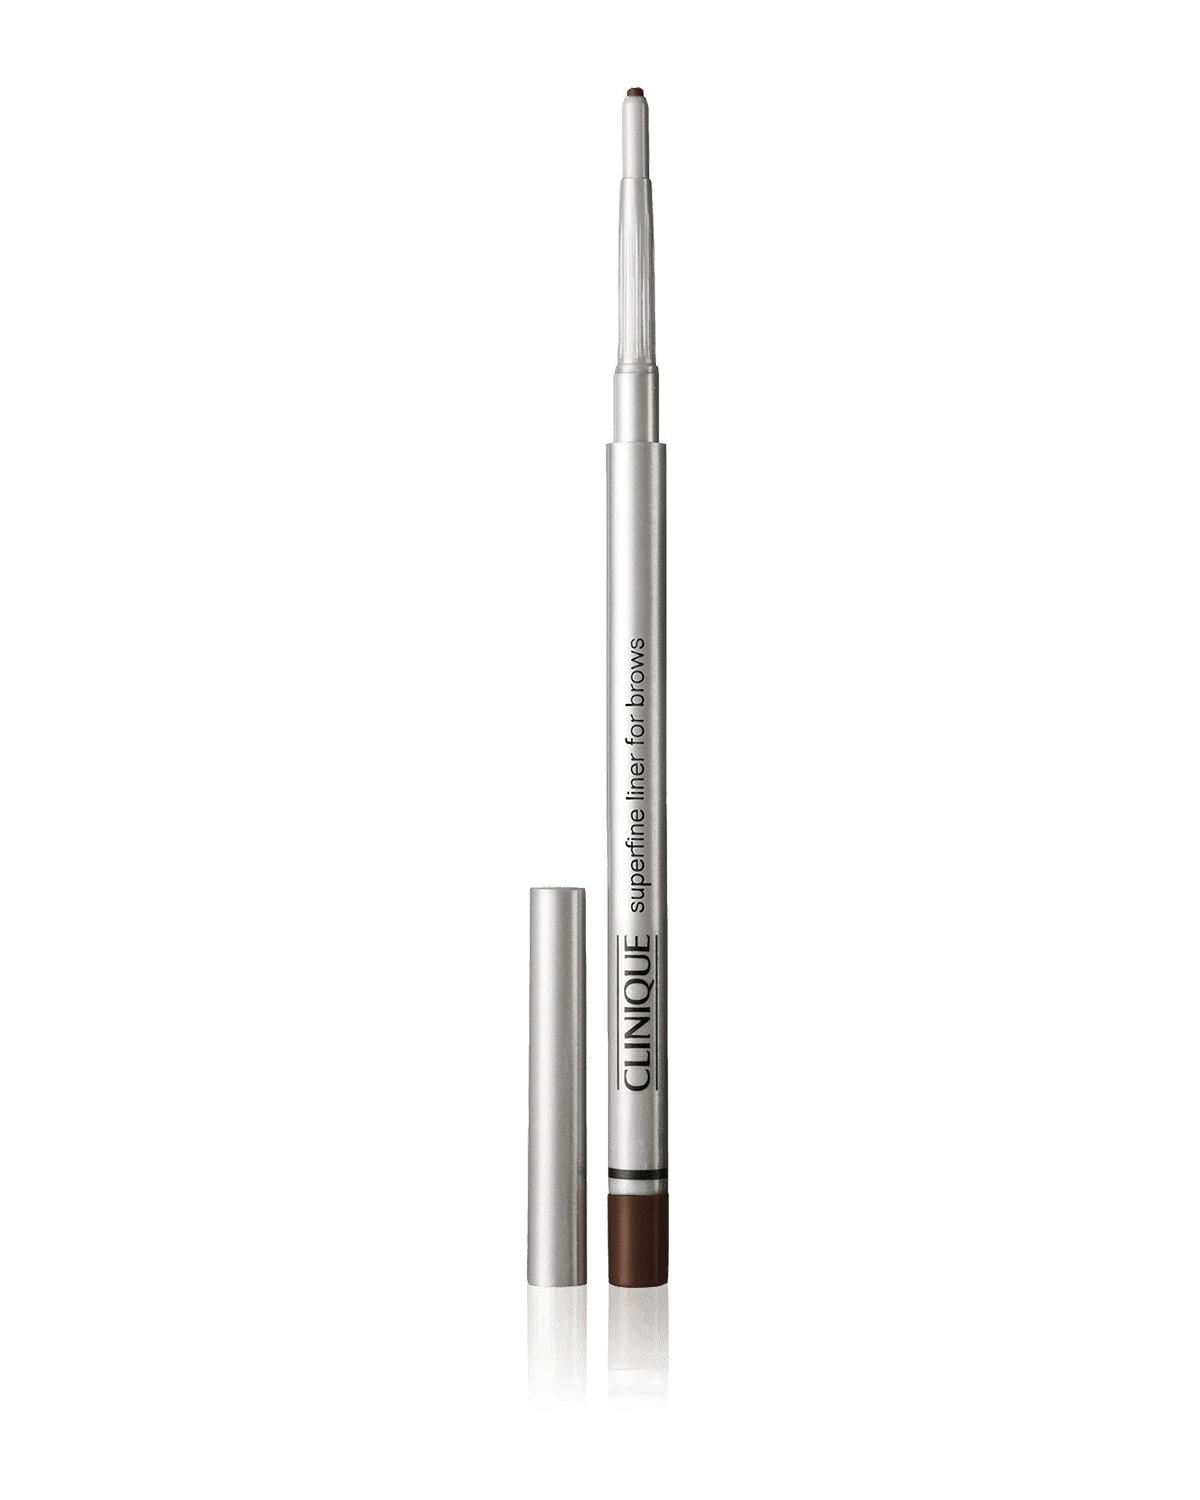 Superfine Liner For Brows Pencil 04 Black Brown